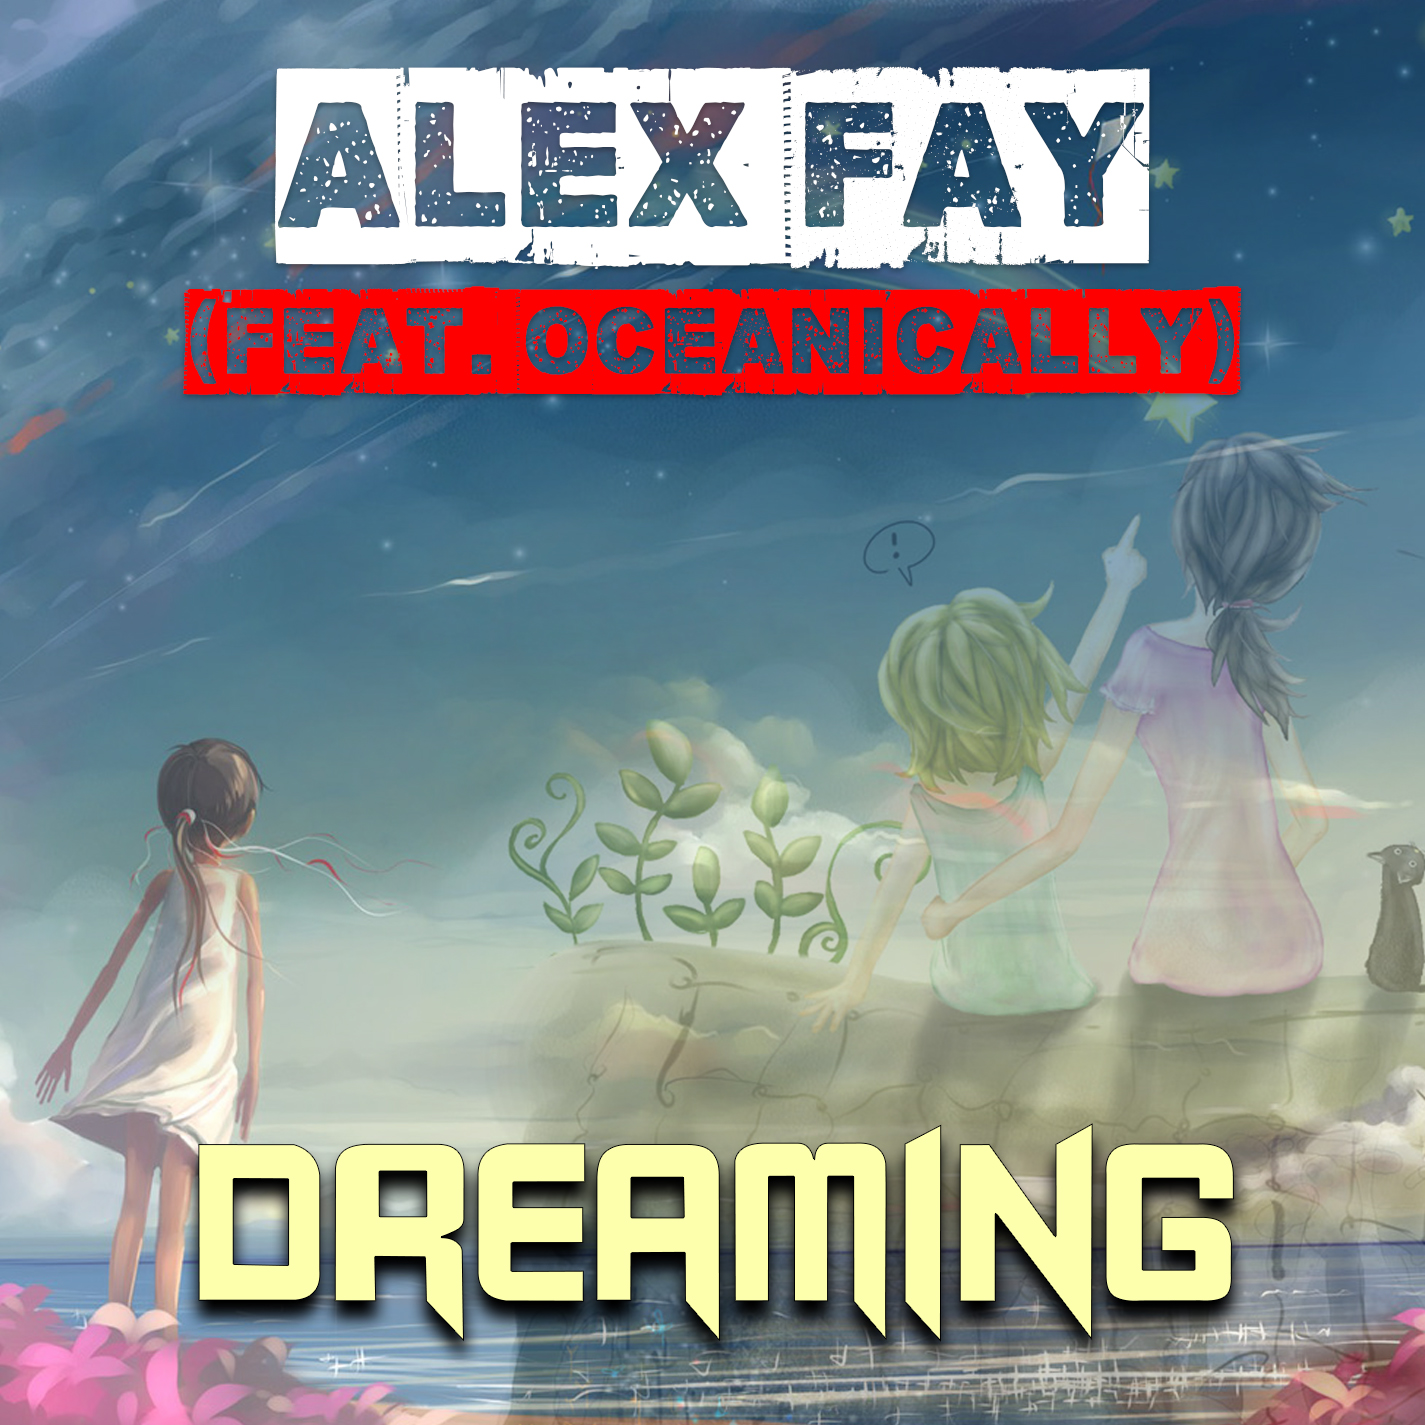 Dreaming (feat. Oceanically)